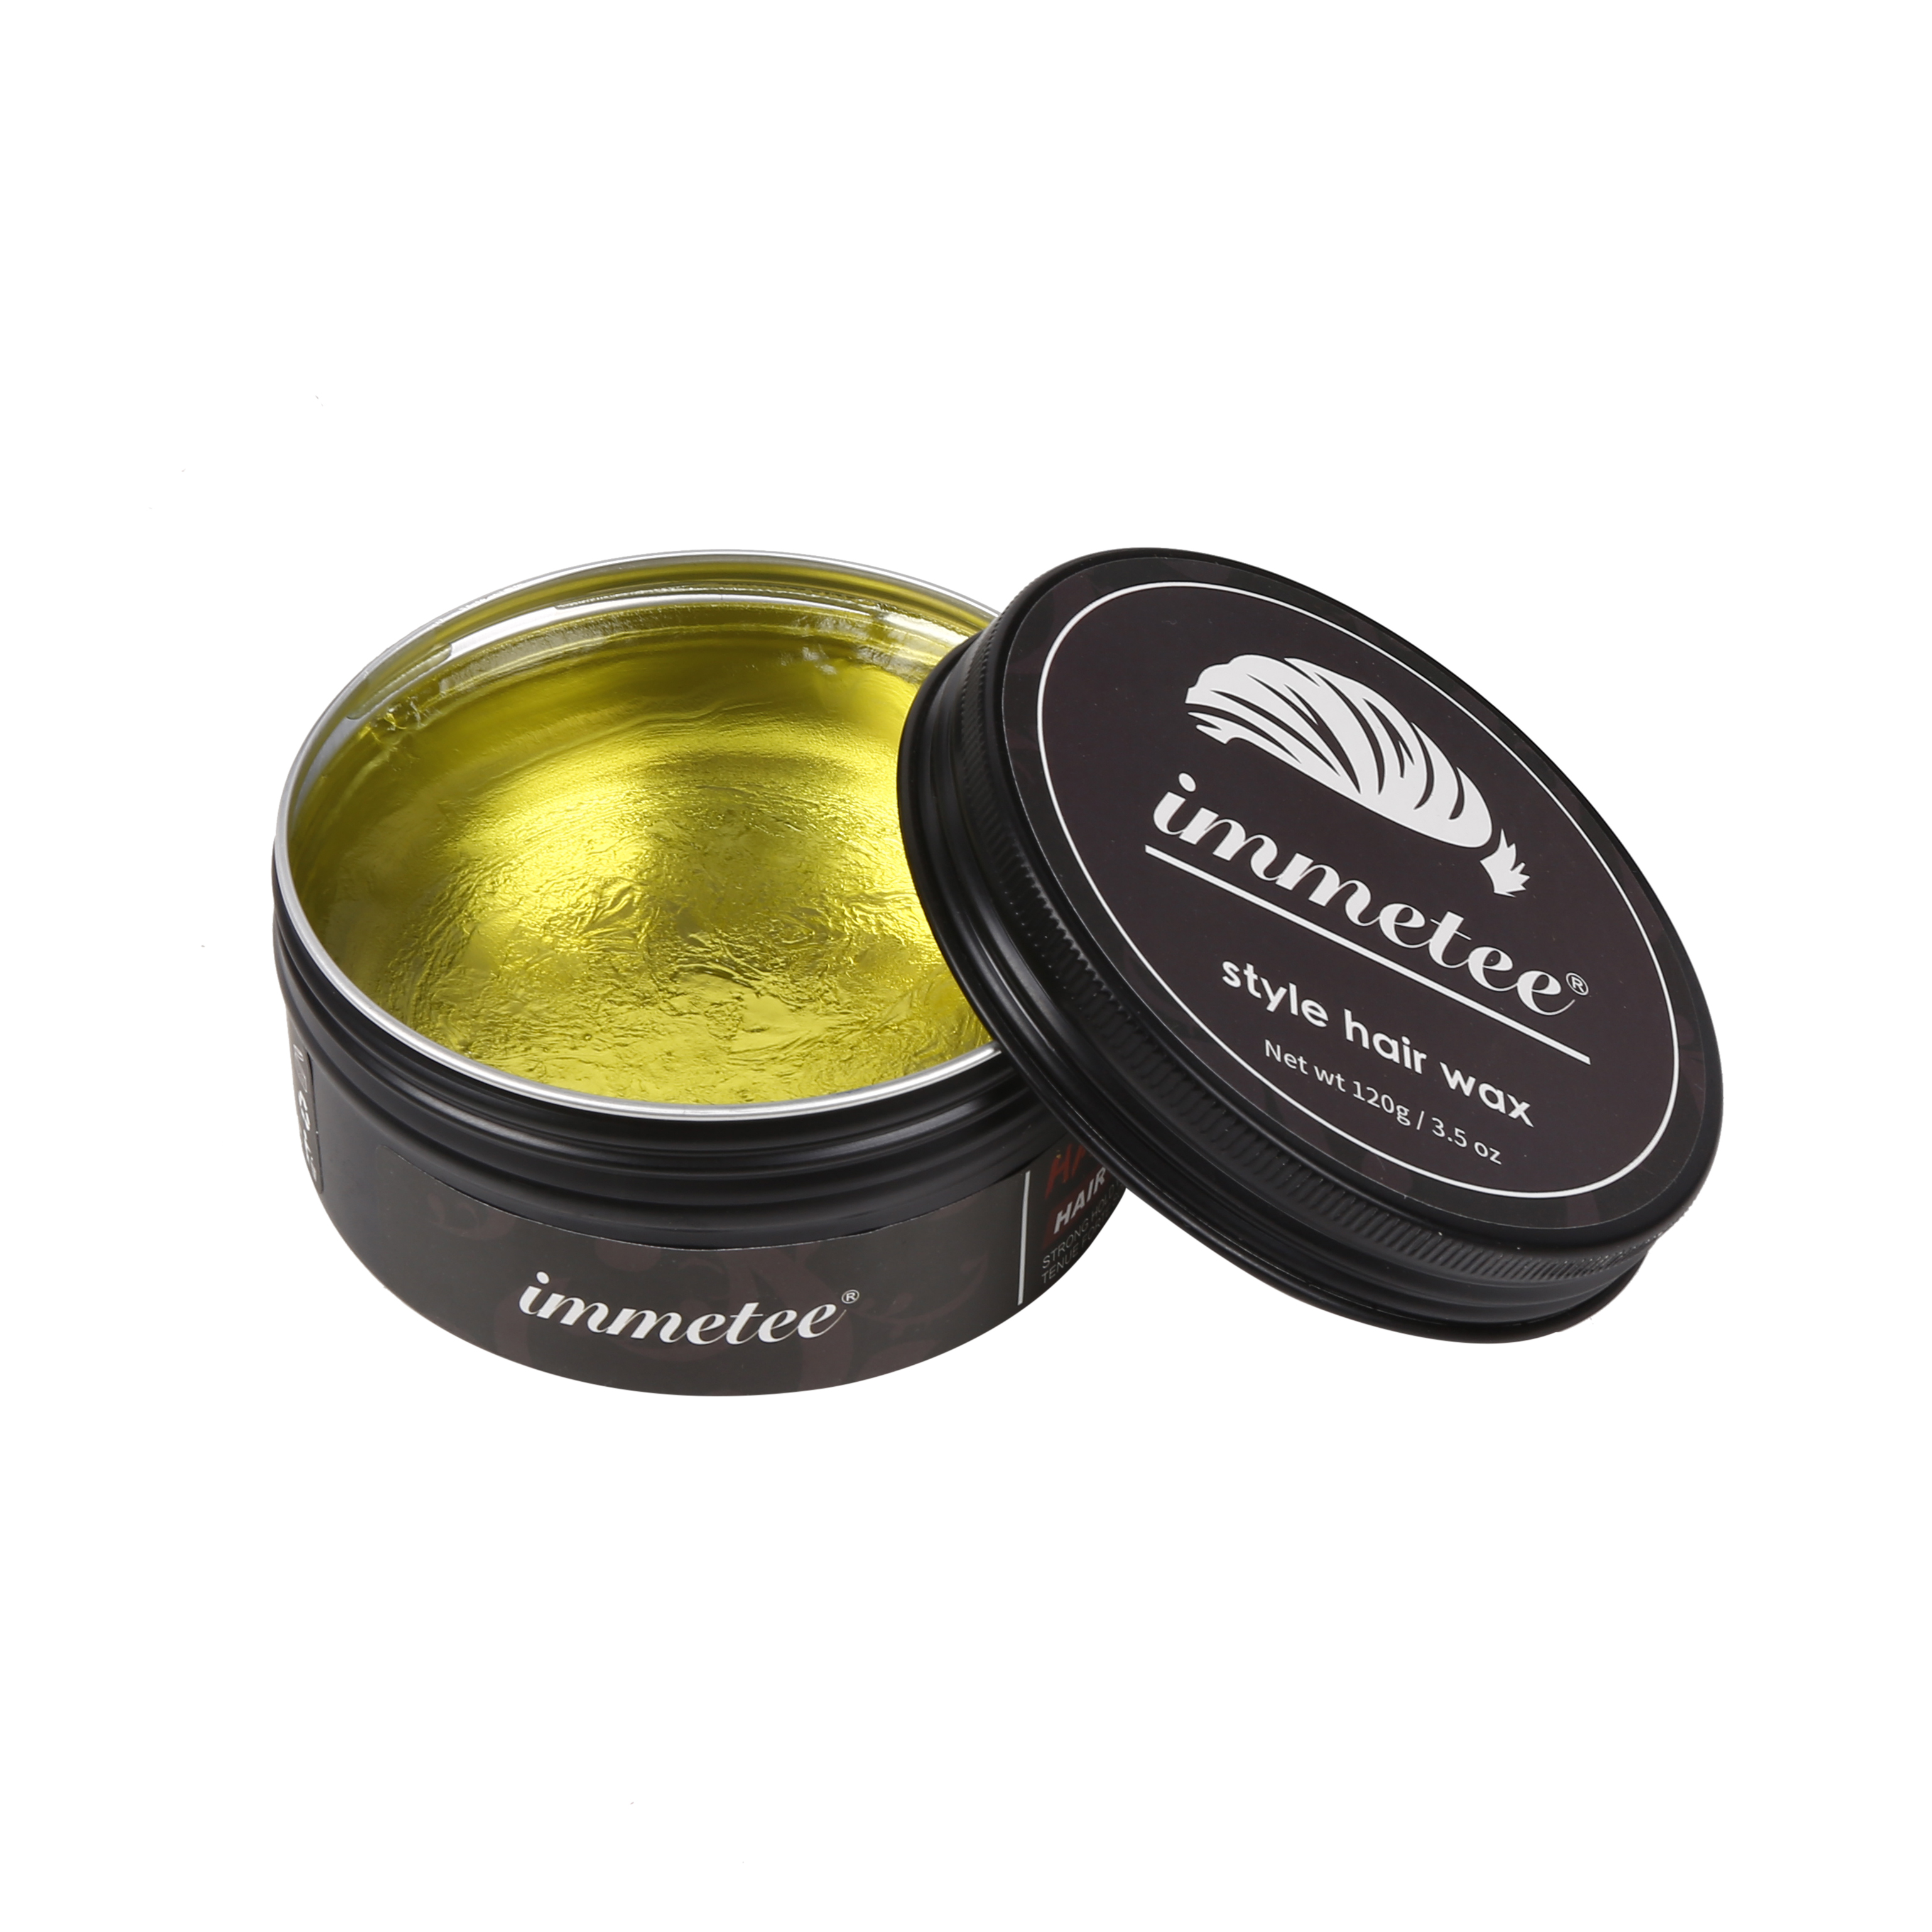 IMMETEE Hair Pomade Men Styling Makeup Natural Hairstyle Product Hair Color Wax For Men&Women Hair Styling Blonde 120g